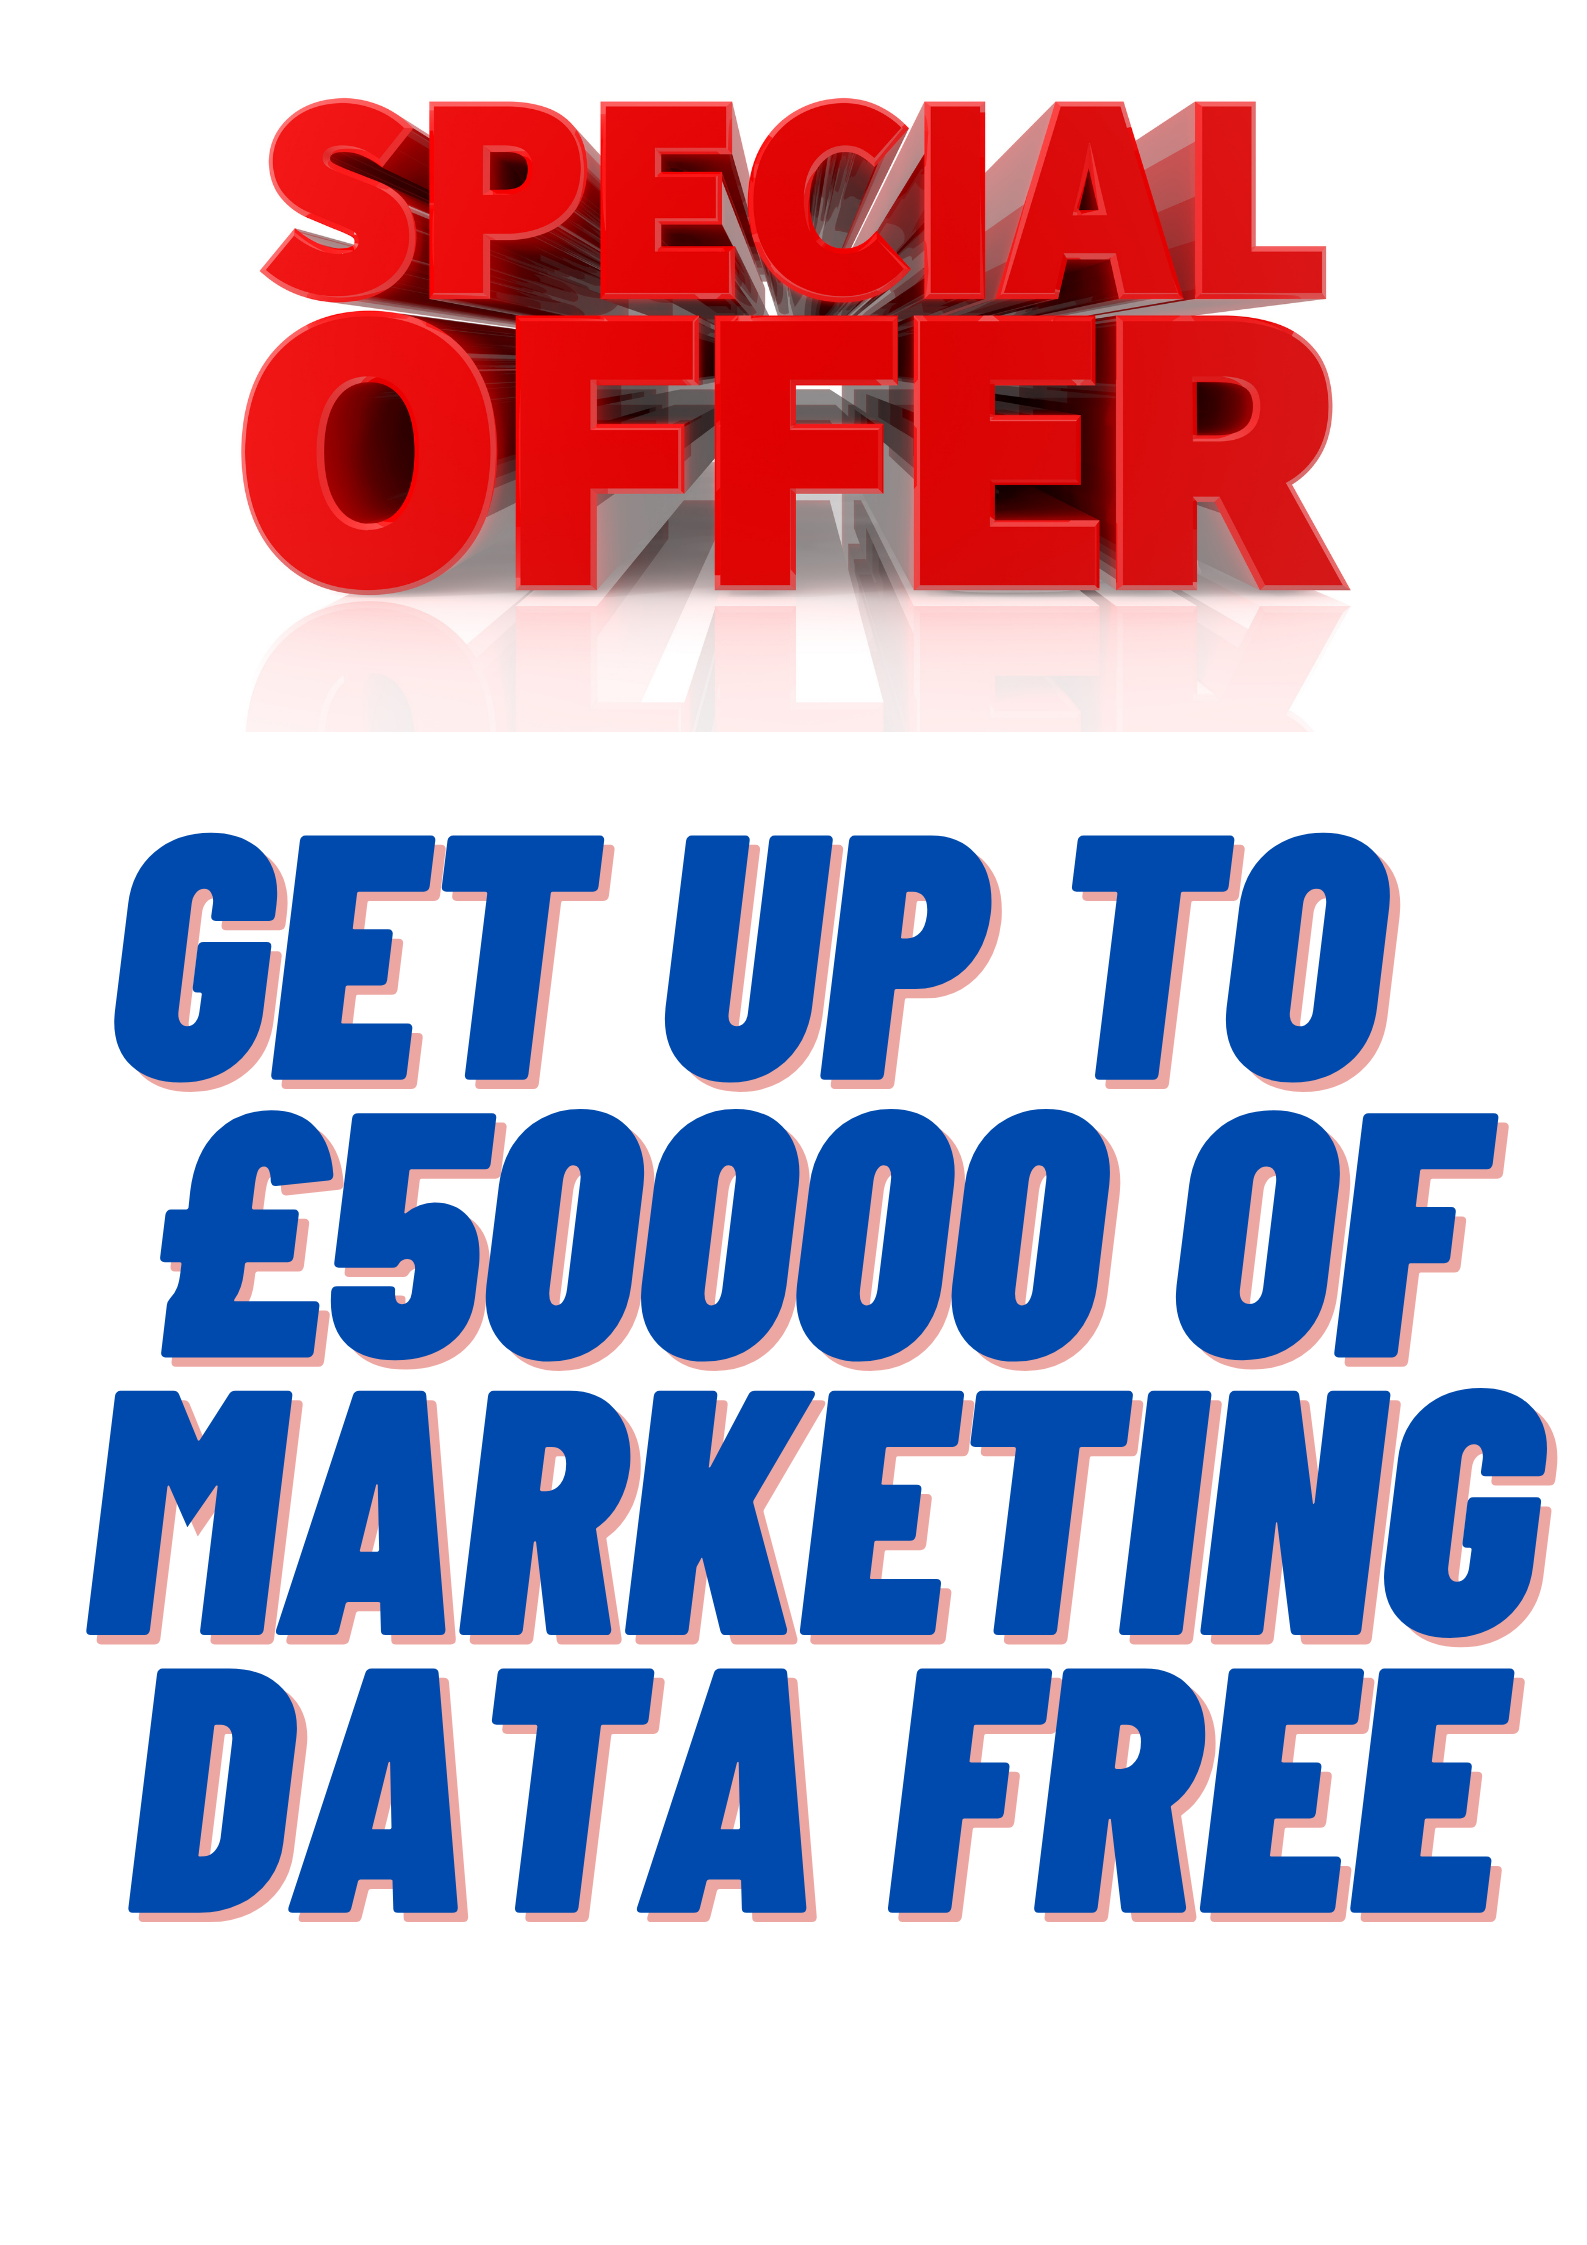 Get up to £50000 of marketing data free